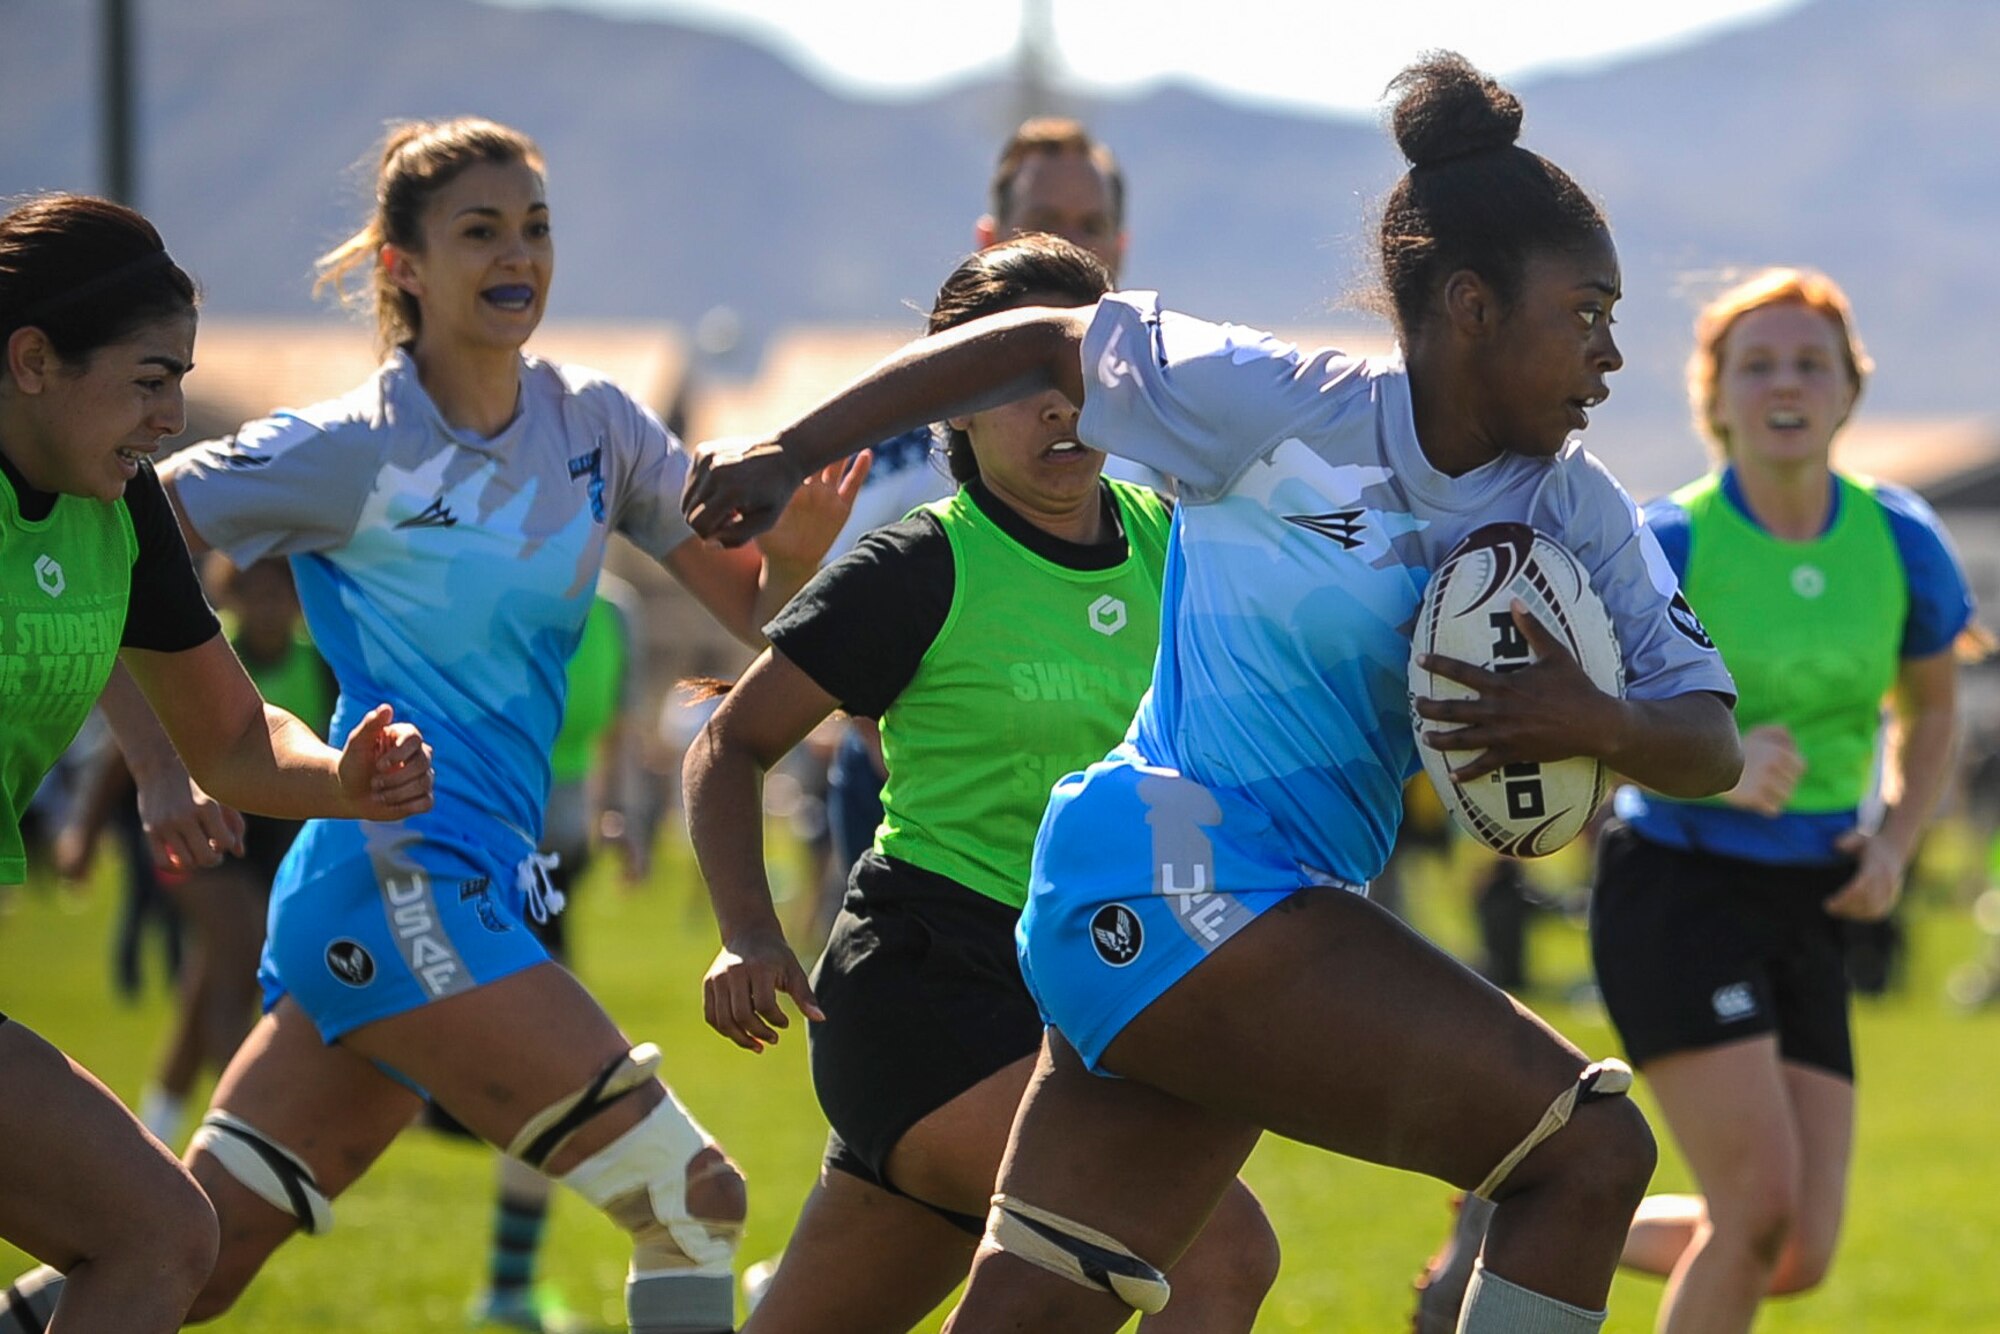 N'Keiah Butler, a wing on the Air Force women’s rugby sevens team, runs with the ball during a Las Vegas Invitational match in Las Vegas, March 2, 2017. Butler was one of 19 women from around the Air Force -- active duty, Guard and Reserve -- who came together to form the service's first official women's rugby team. (U.S. Air Force photo by Staff Sgt. Siuta B. Ika)